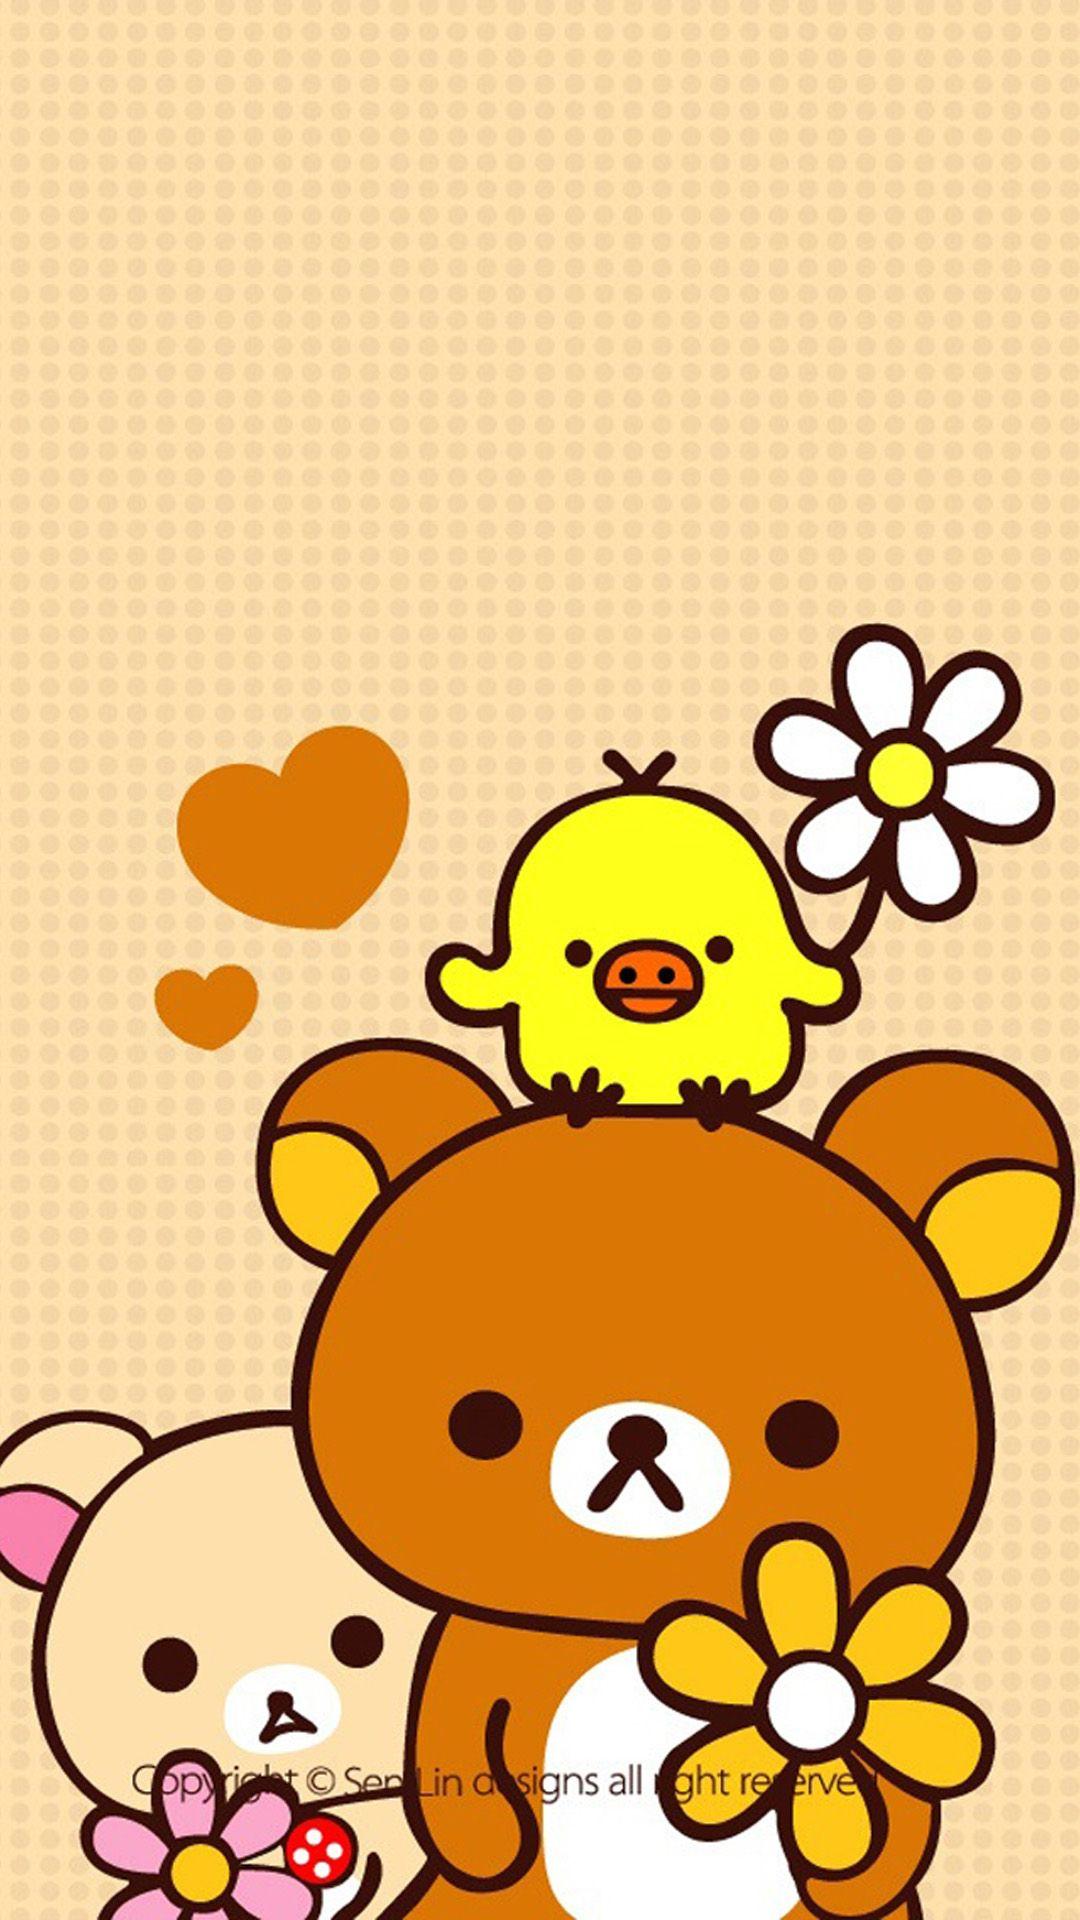 Cute Samsung Wallpapers - Top Free Cute Samsung Backgrounds ...